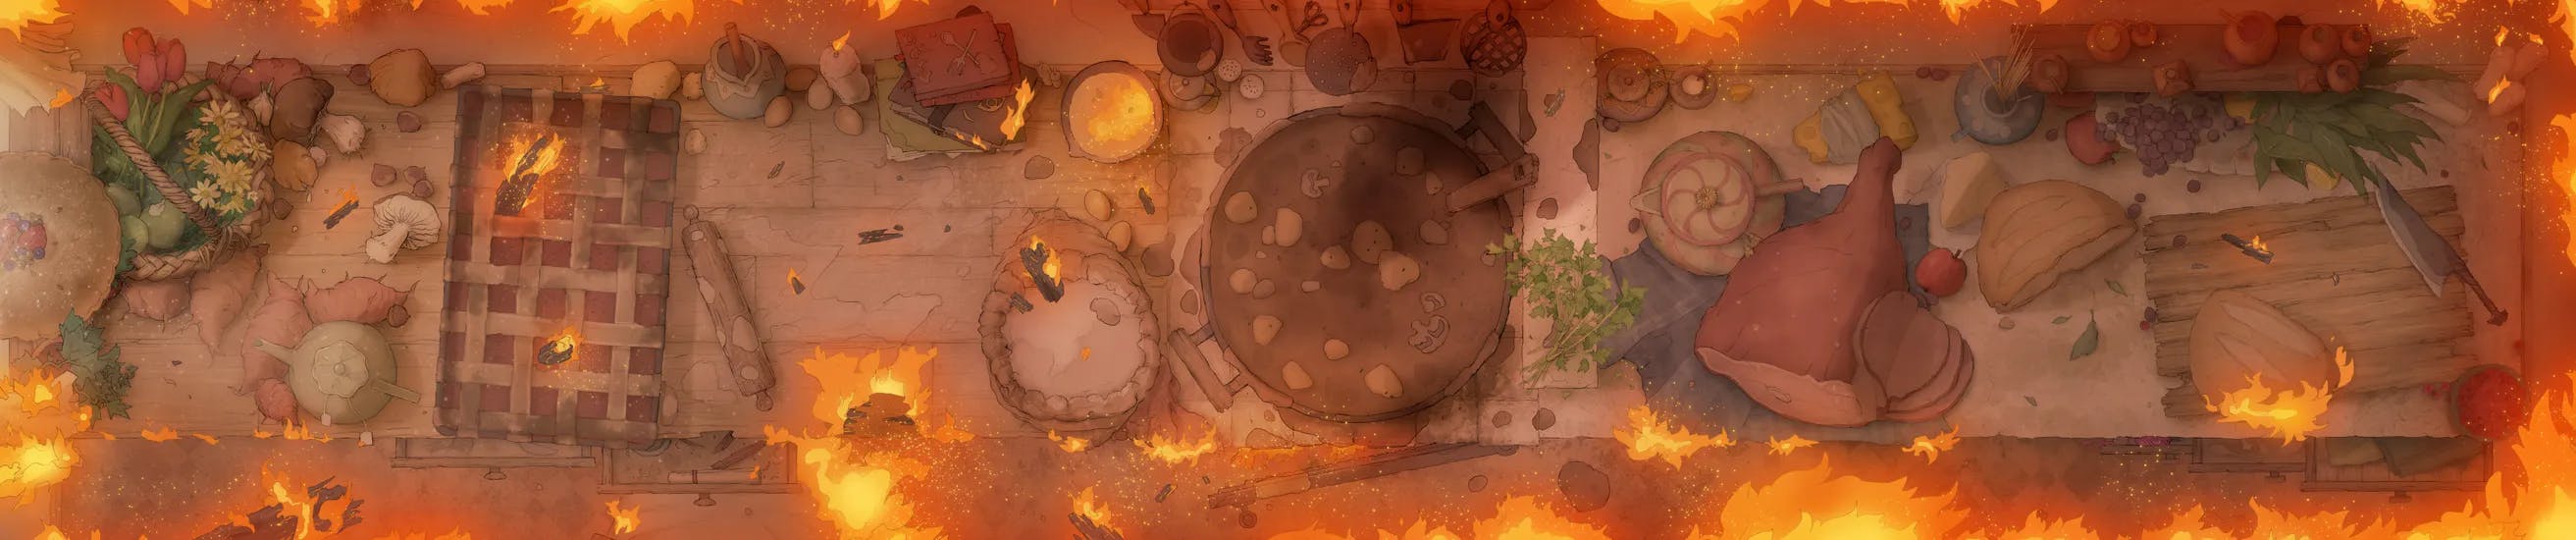 Giant Kitchen map, Fire variant